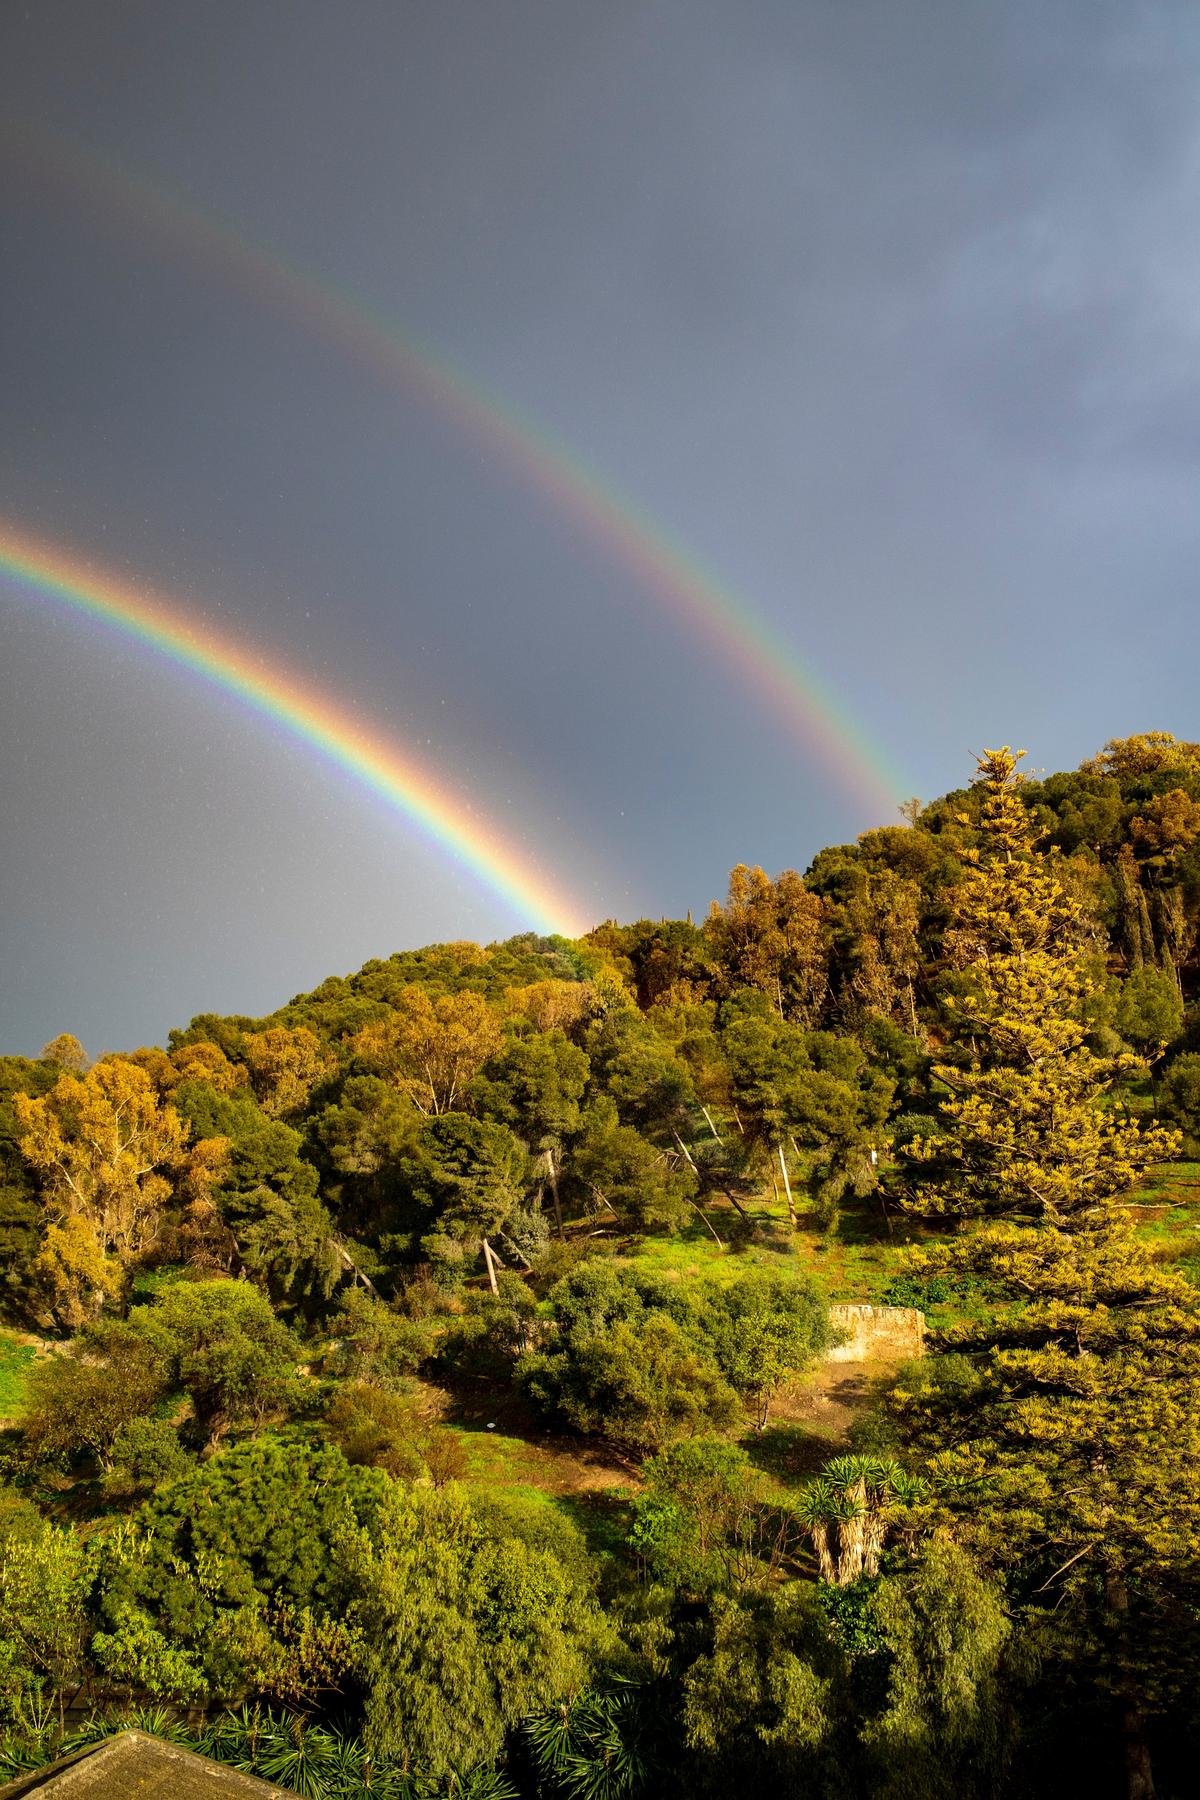 Double rainbow appearing over a forest with green and yellow leaves